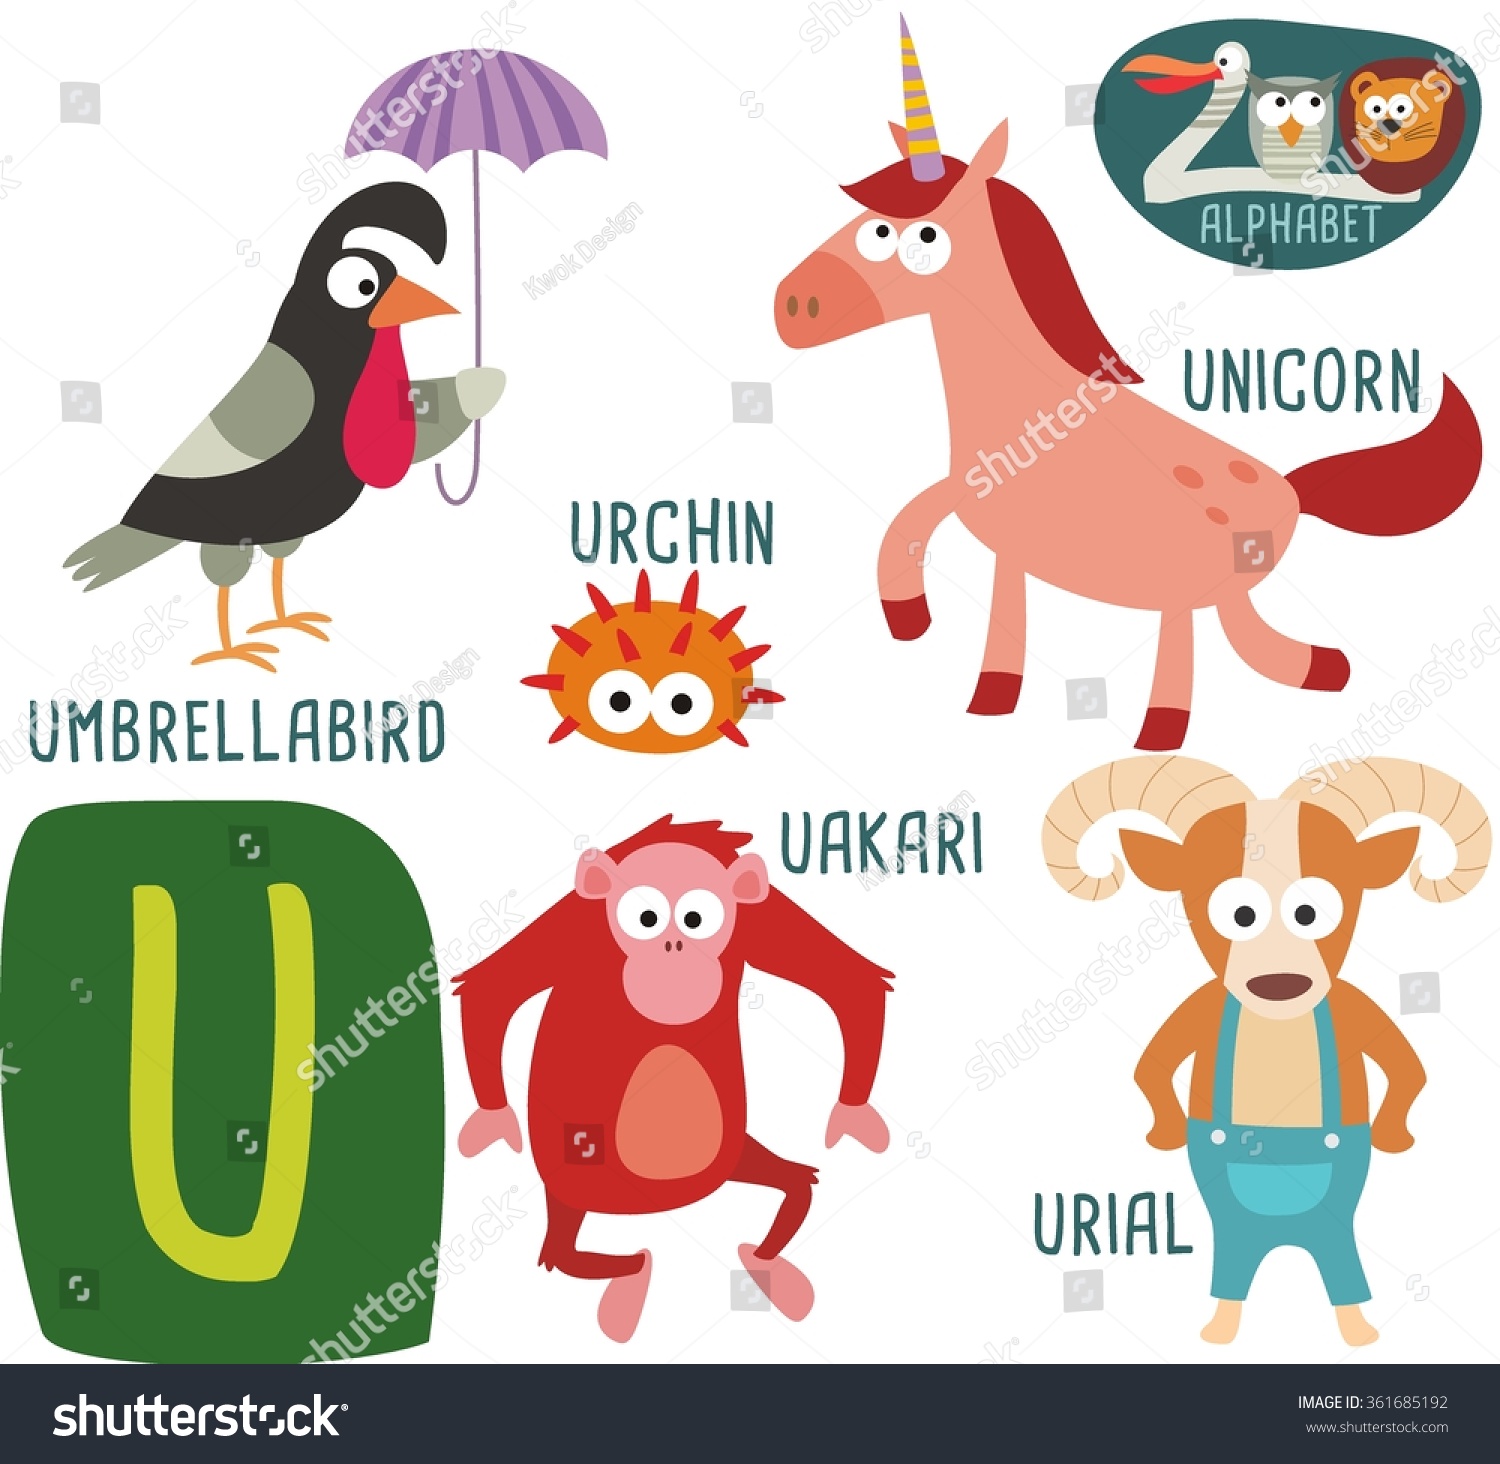 Animals That Start With The Letter U - Inspec Wallp Animals